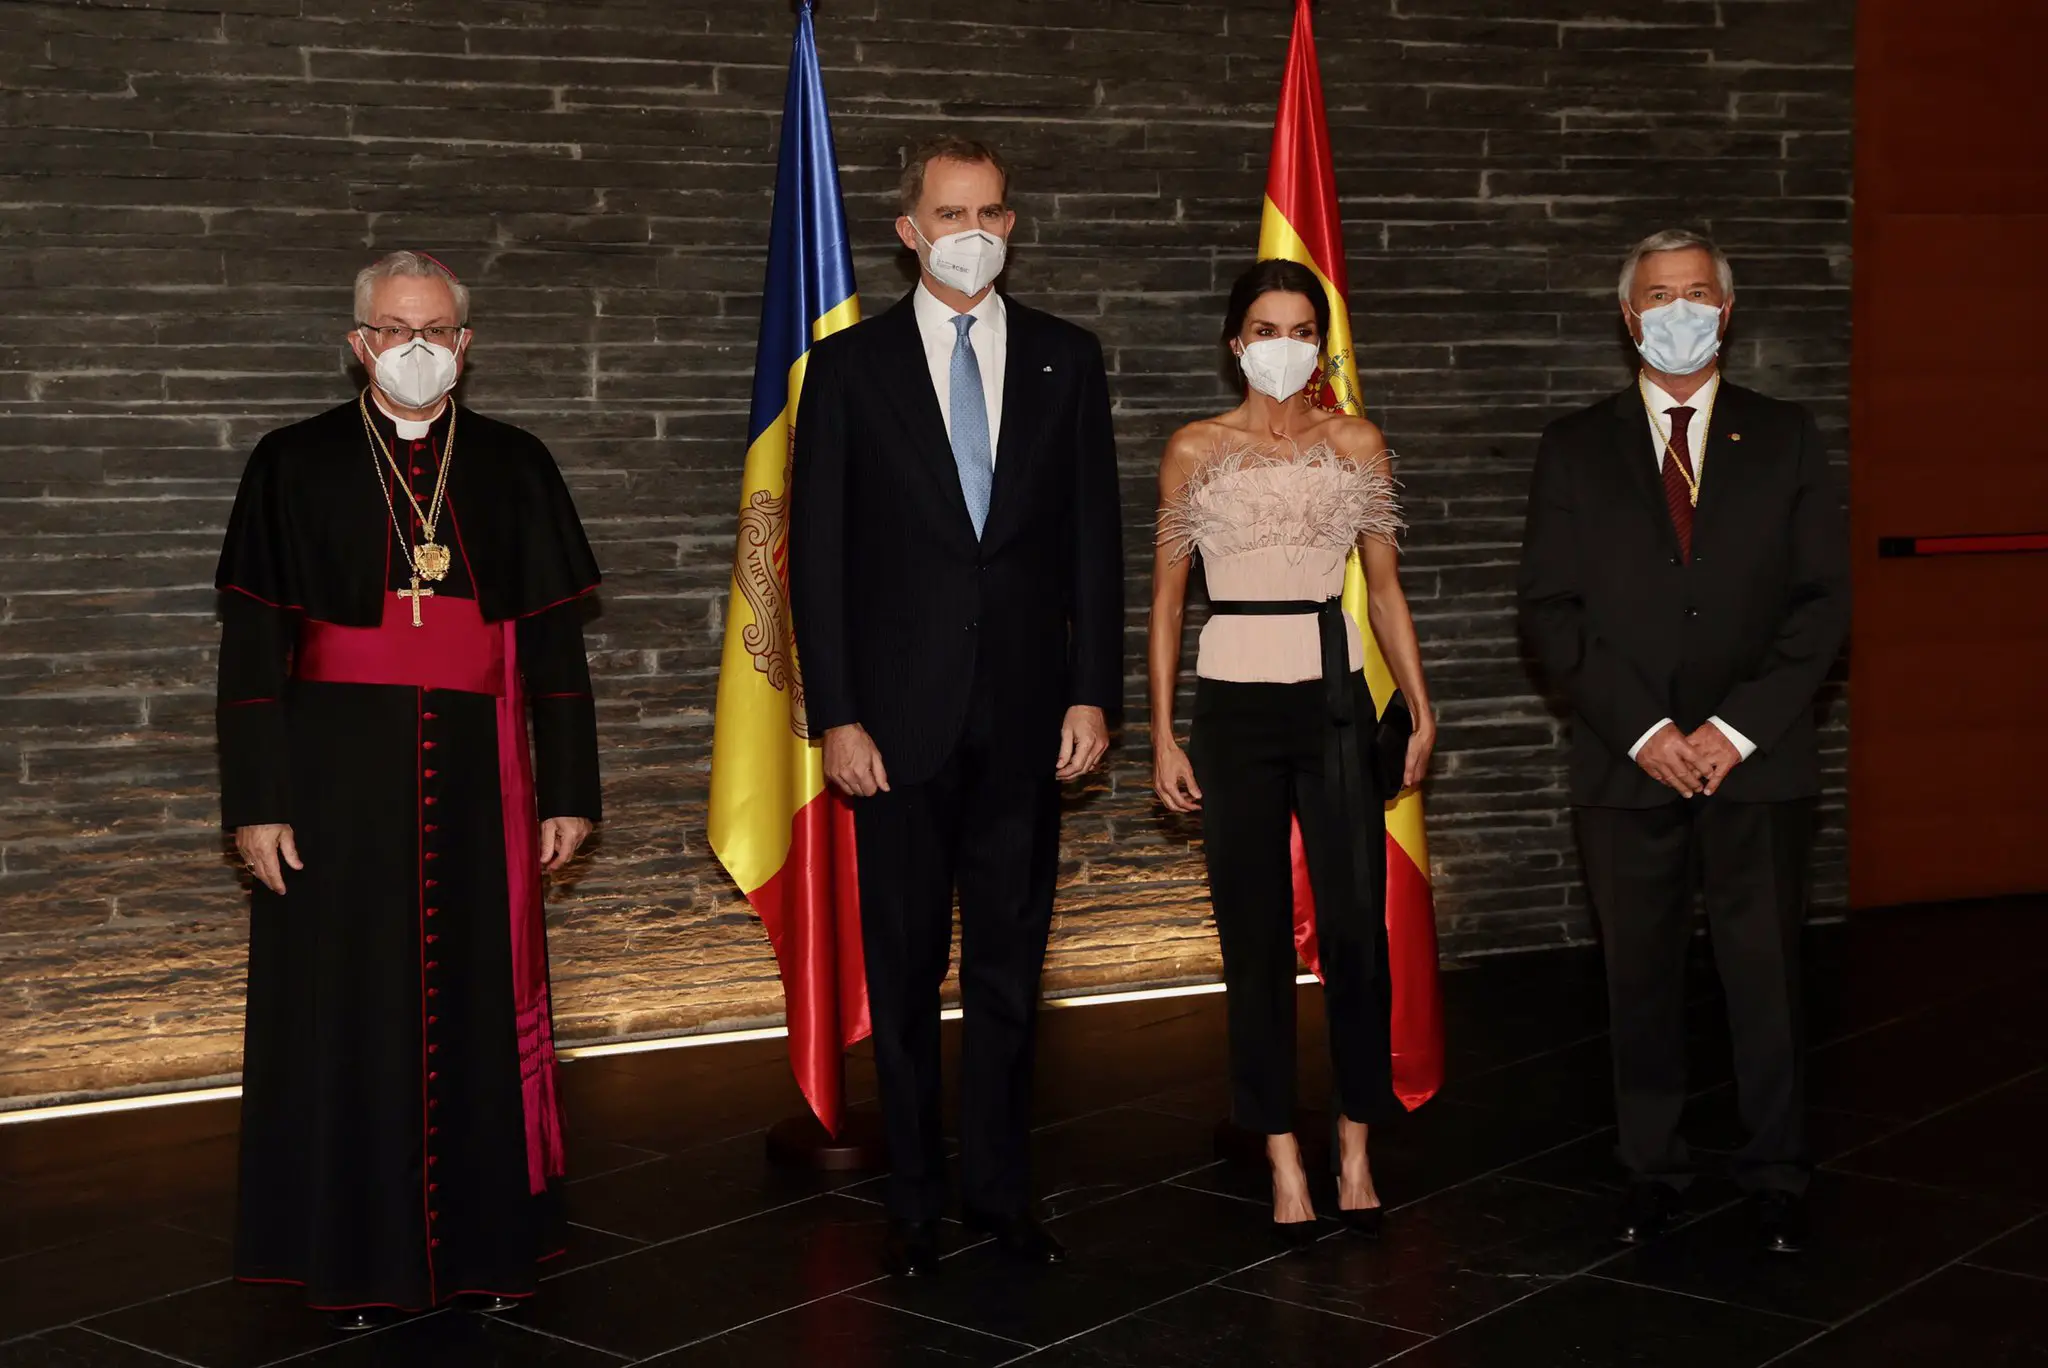 King Felipe and Queen Letizia of Spain attended an official dinner in Andorra